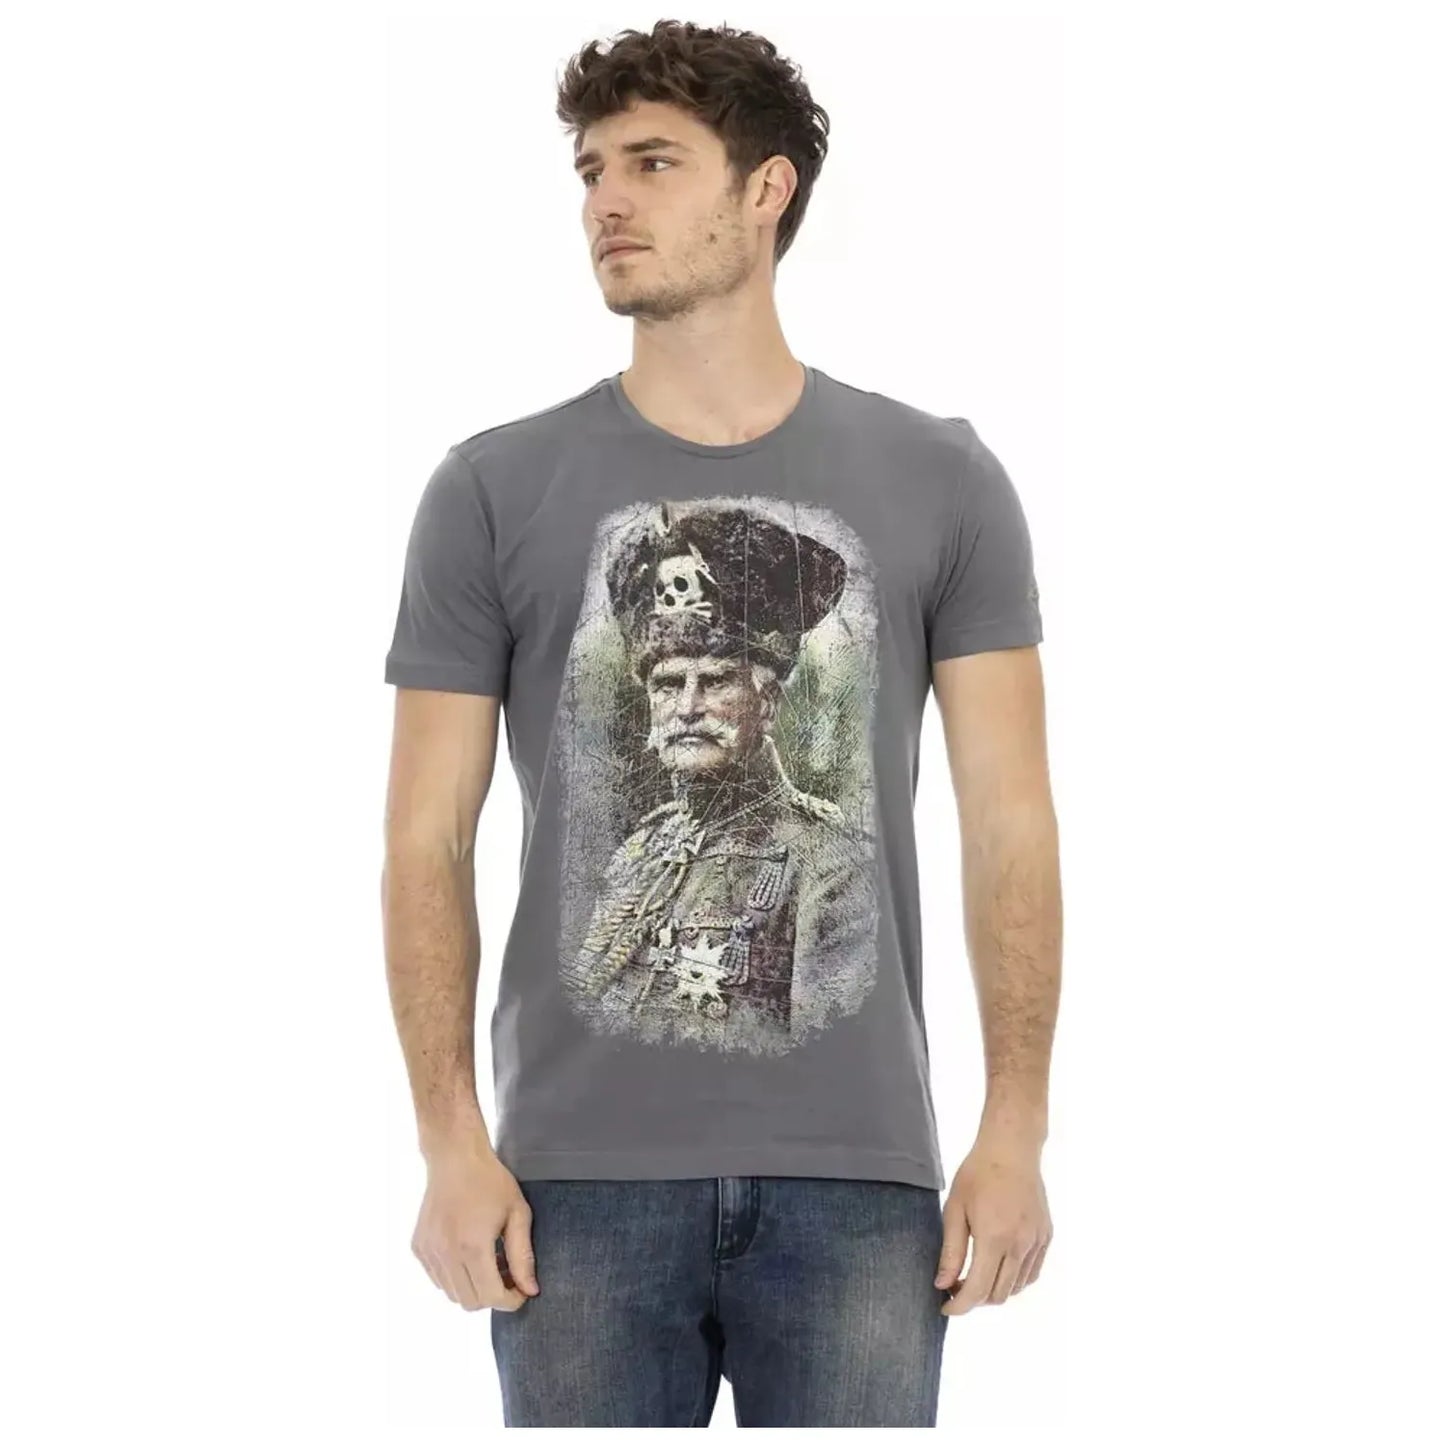 Trussardi Action Elegant Gray Round Neck Tee with Front Print gray-cotton-t-shirt-63